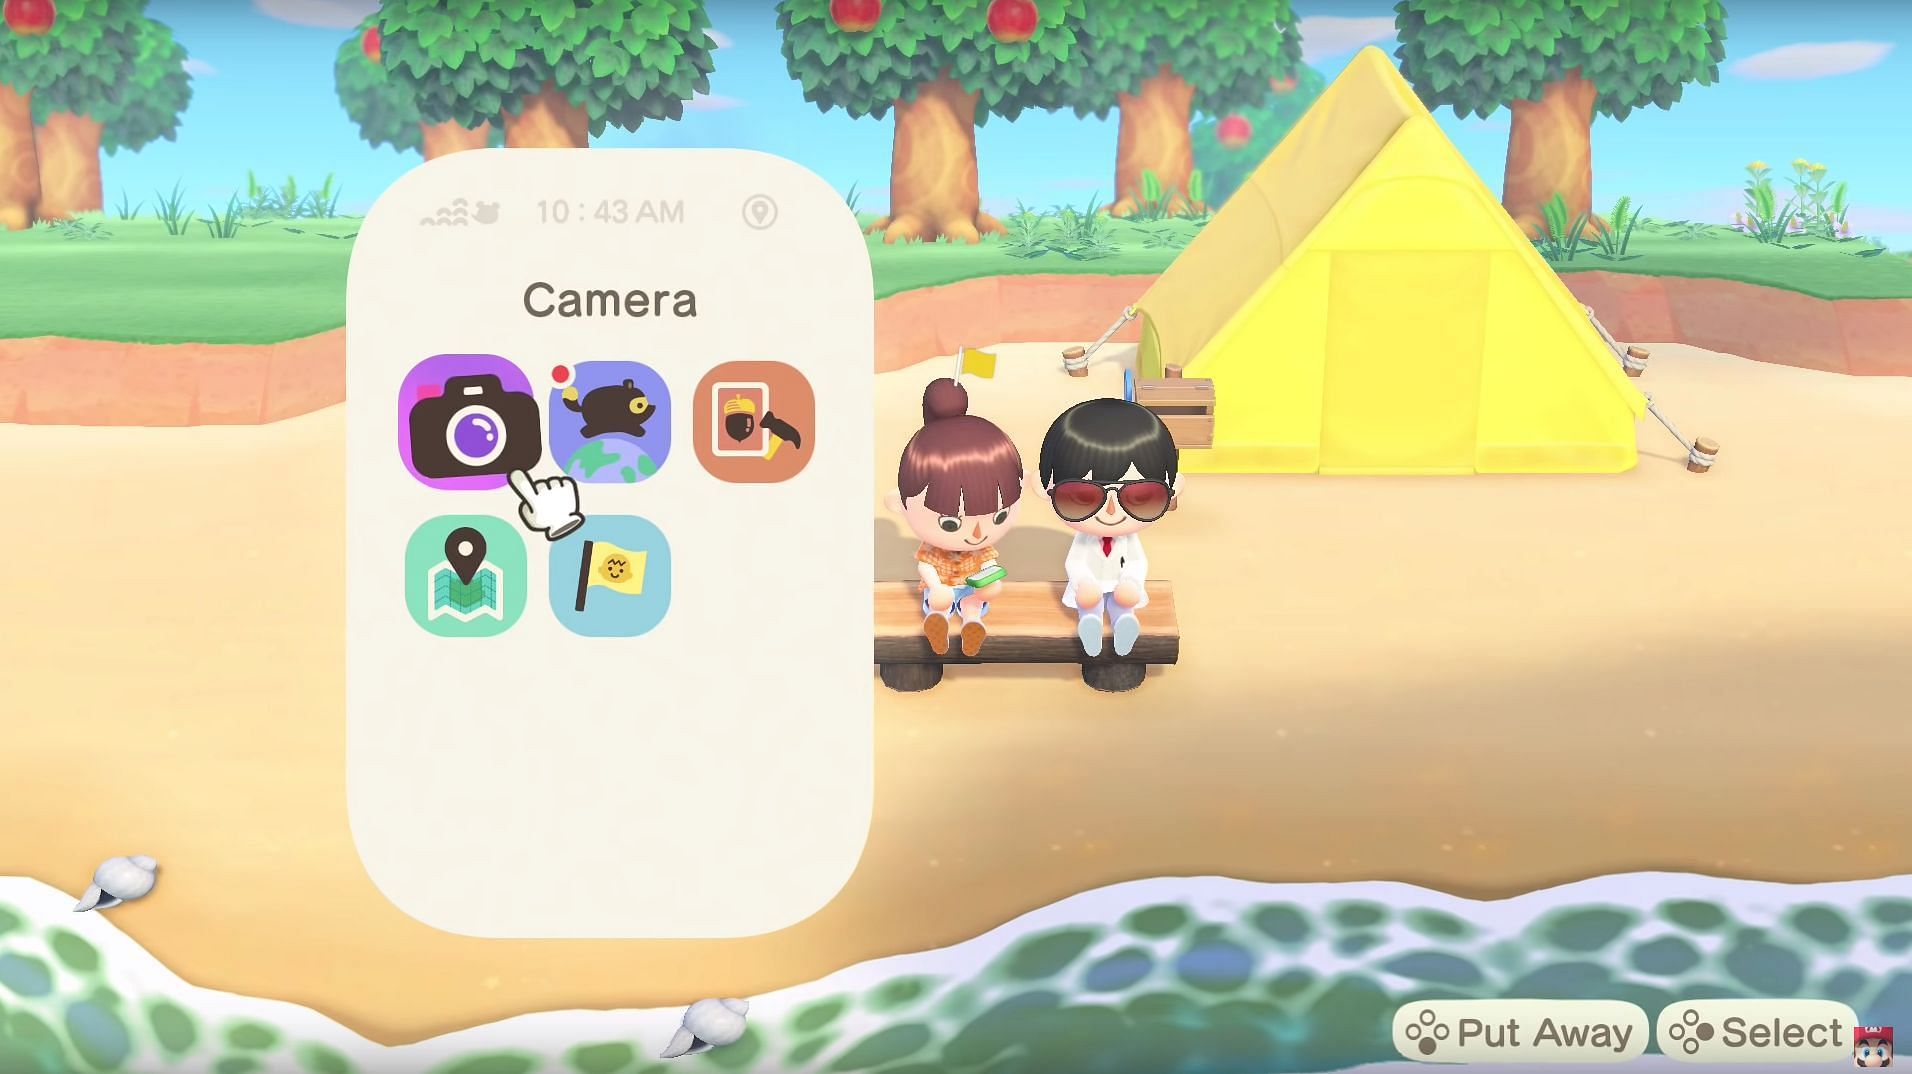 The camera is key to using this new feature. Image via Nintendo